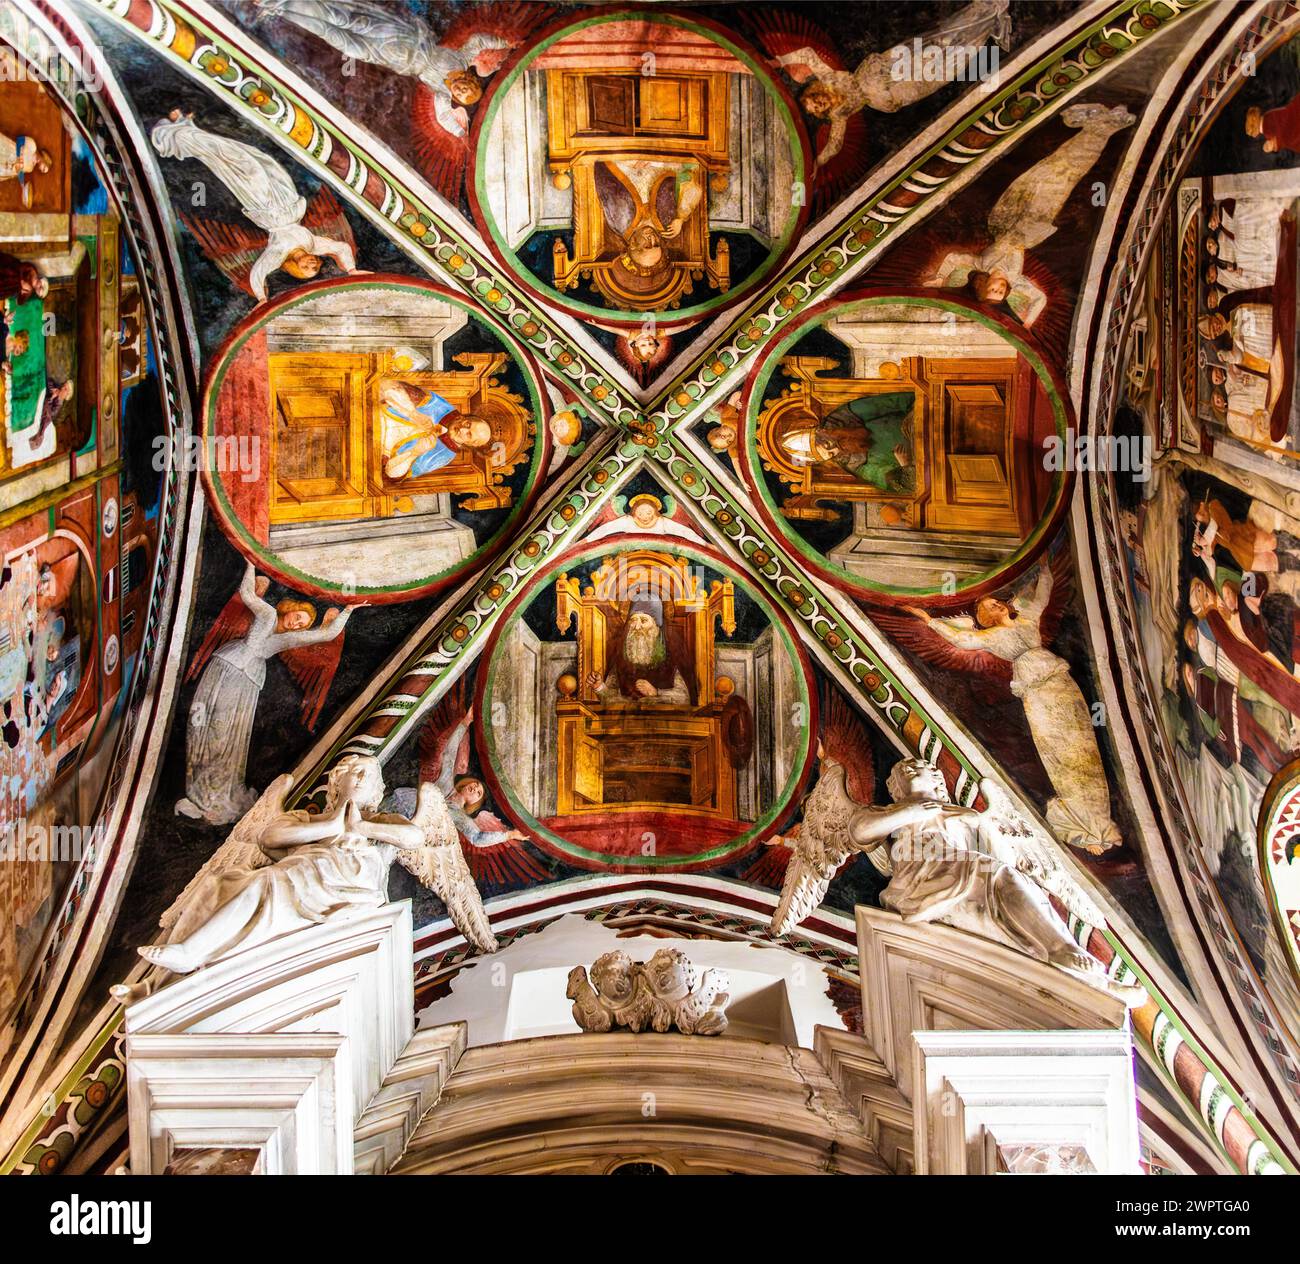 Ceiling frescoes, Duomo di San Marco, old town centre with magnificent aristocratic palaces and Venetian-style arcades, Pordenone, Friuli, Italy Stock Photo